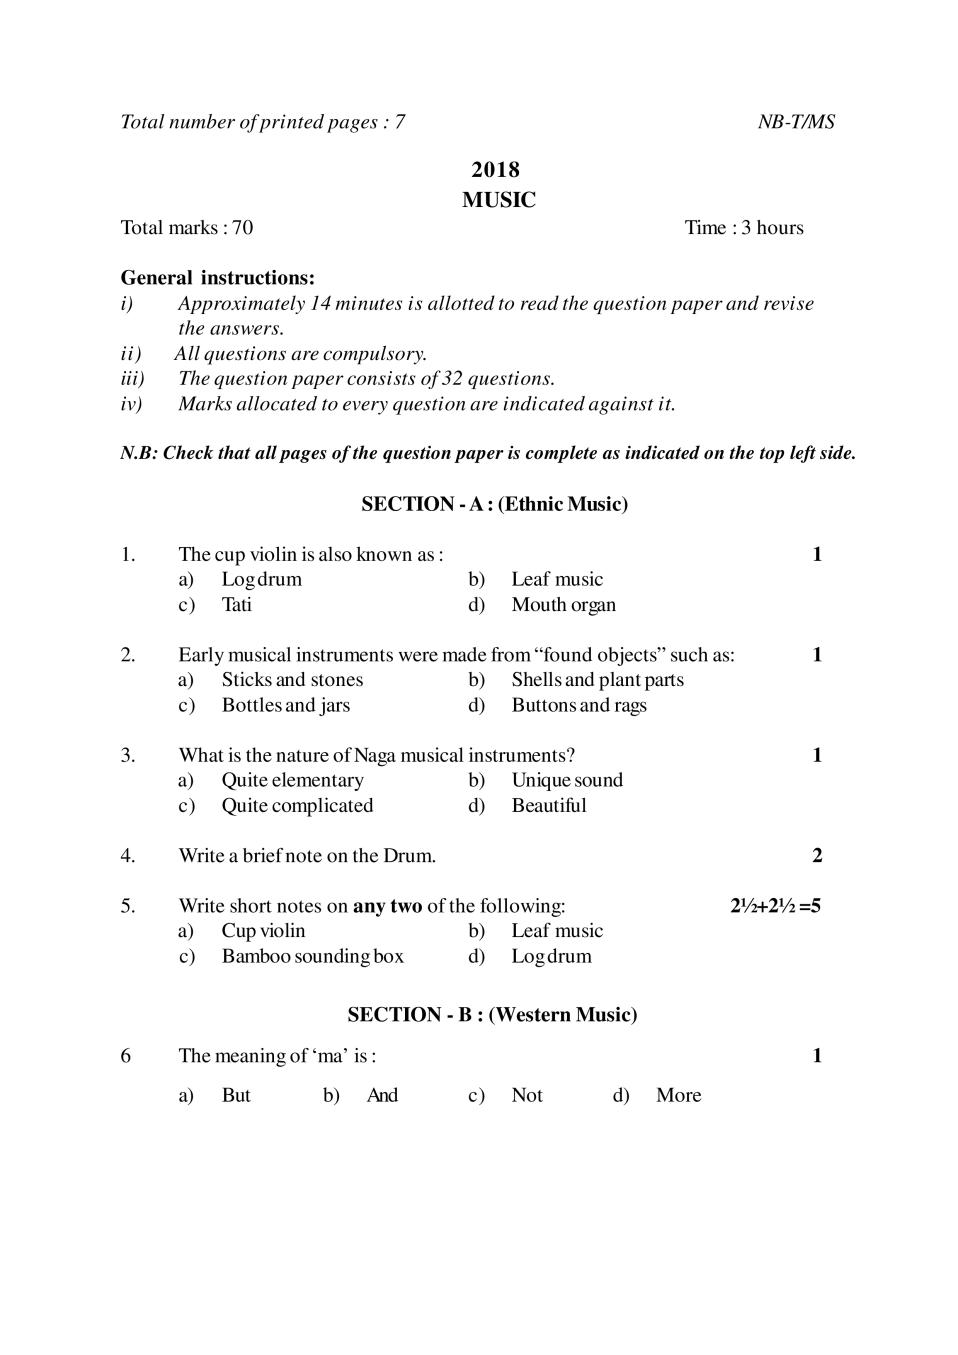 NBSE Class 10 Question Paper 2018 for Music - Page 1